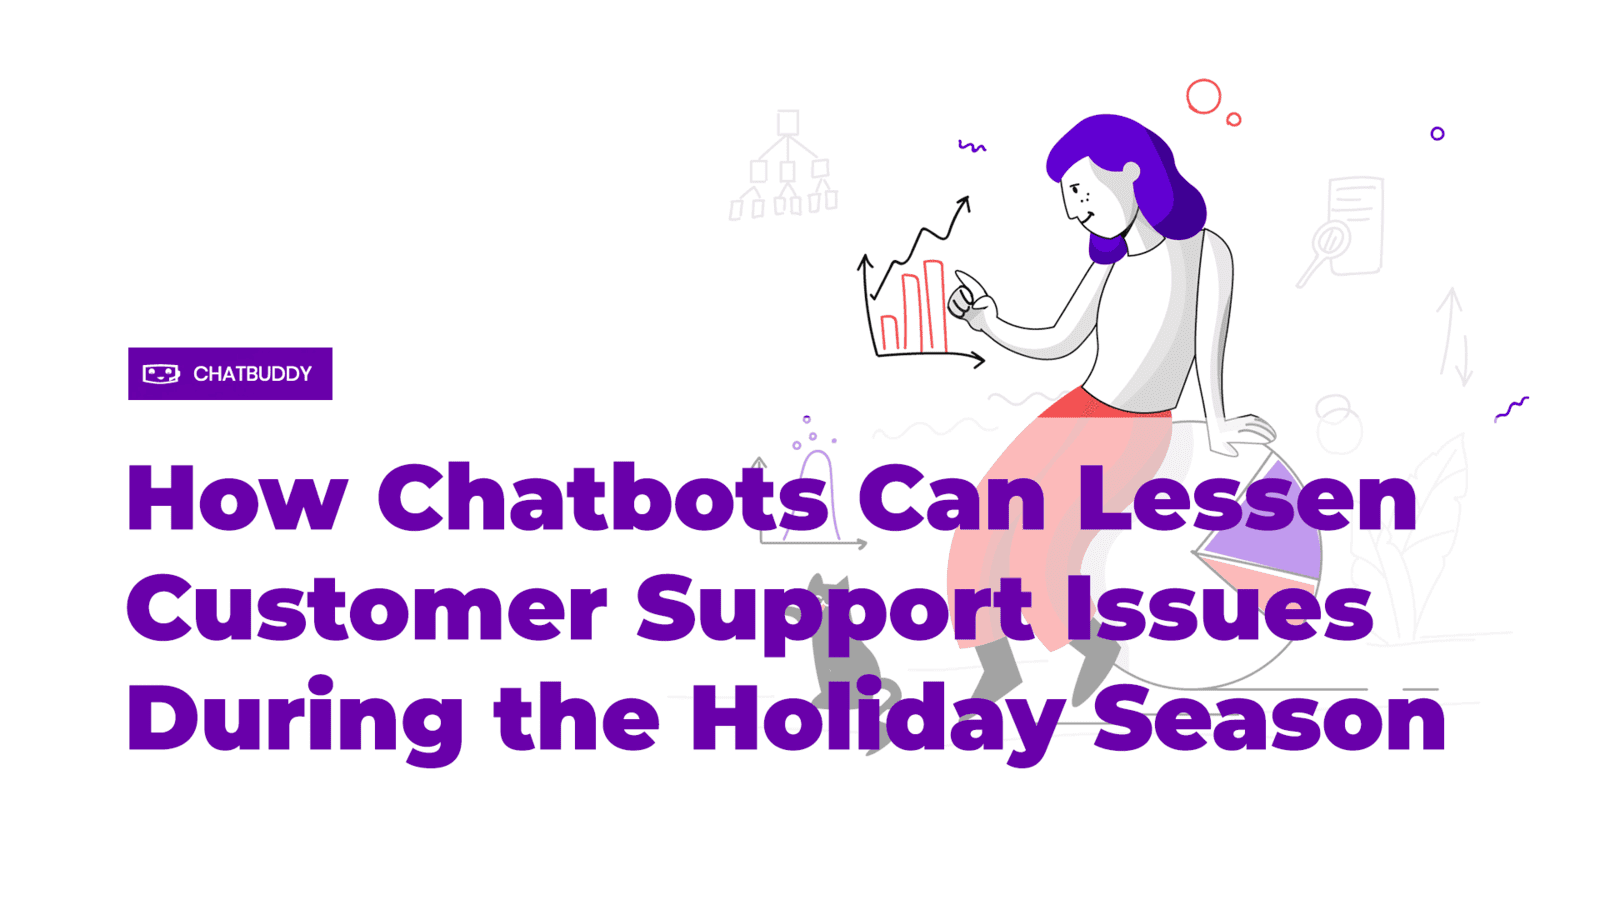 How Chatbots Can Lessen Customer Support Issues During the Holiday Season